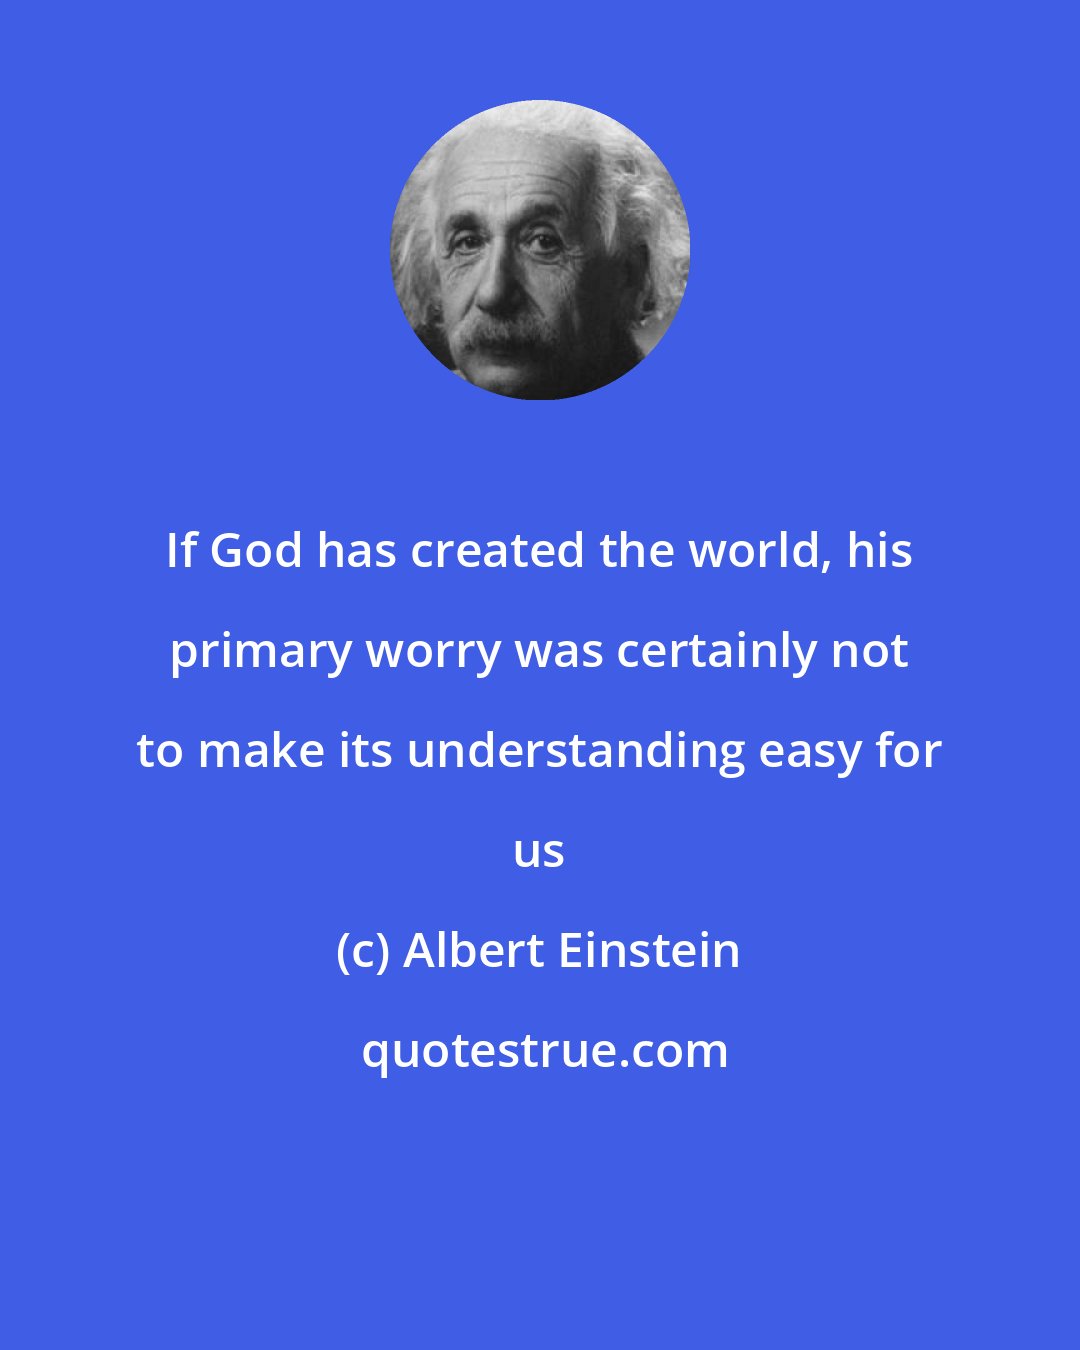 Albert Einstein: If God has created the world, his primary worry was certainly not to make its understanding easy for us